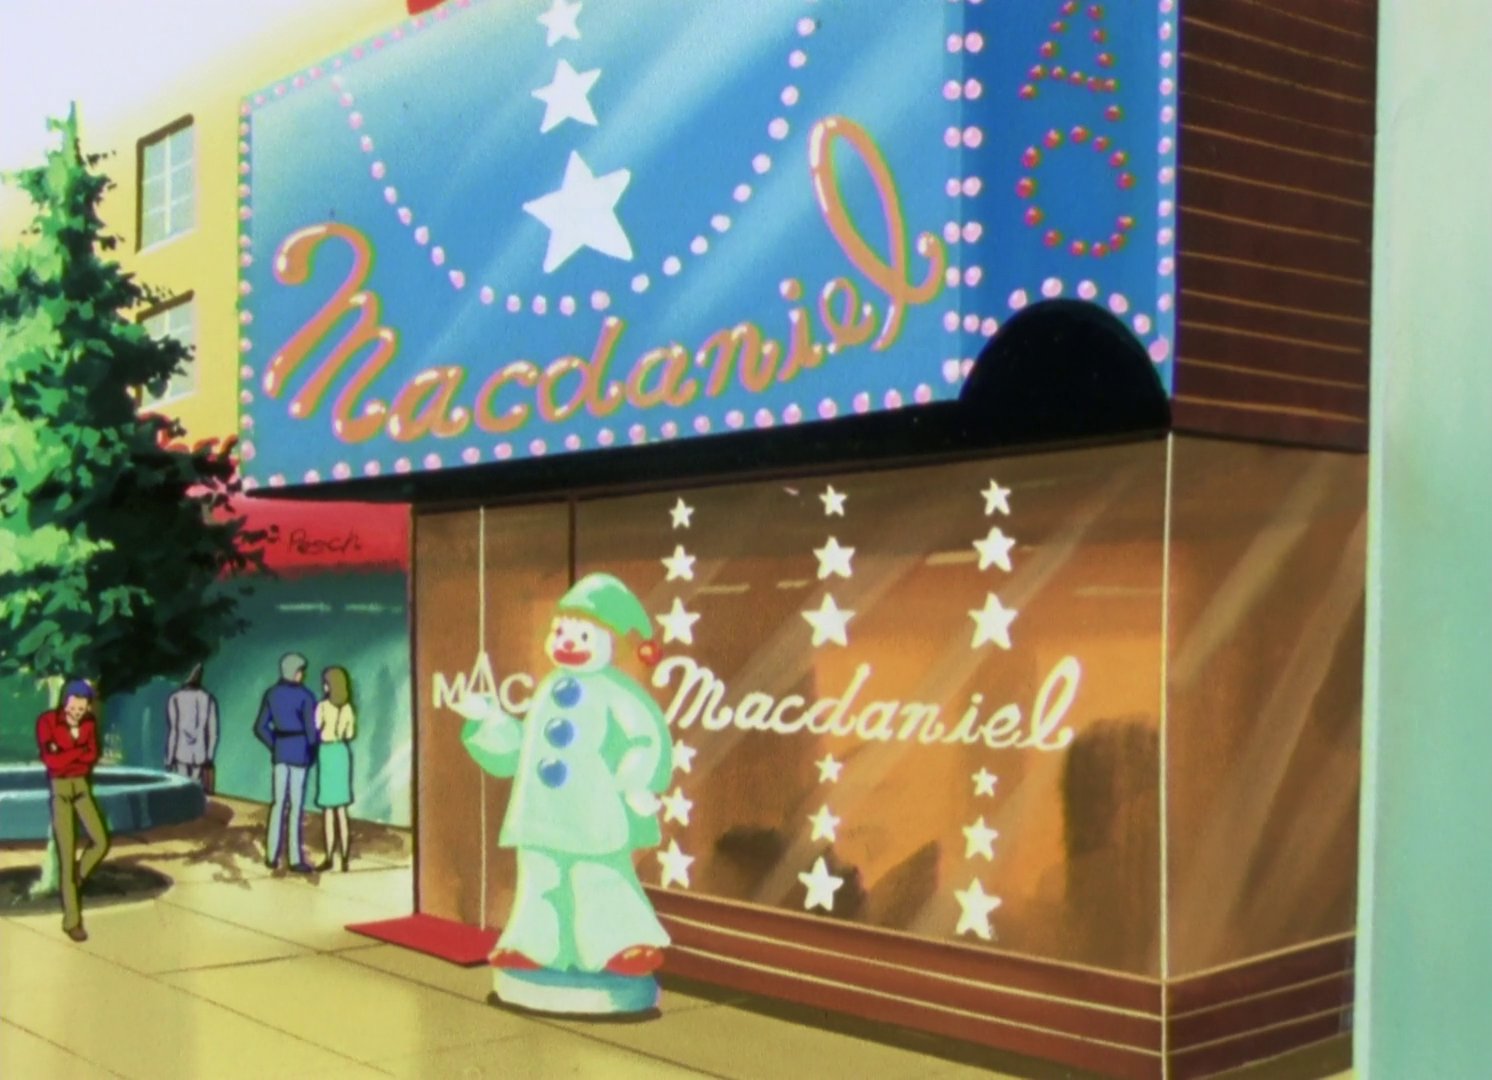 The storefront of MacDaniel, with a mint green clown statue outside it.